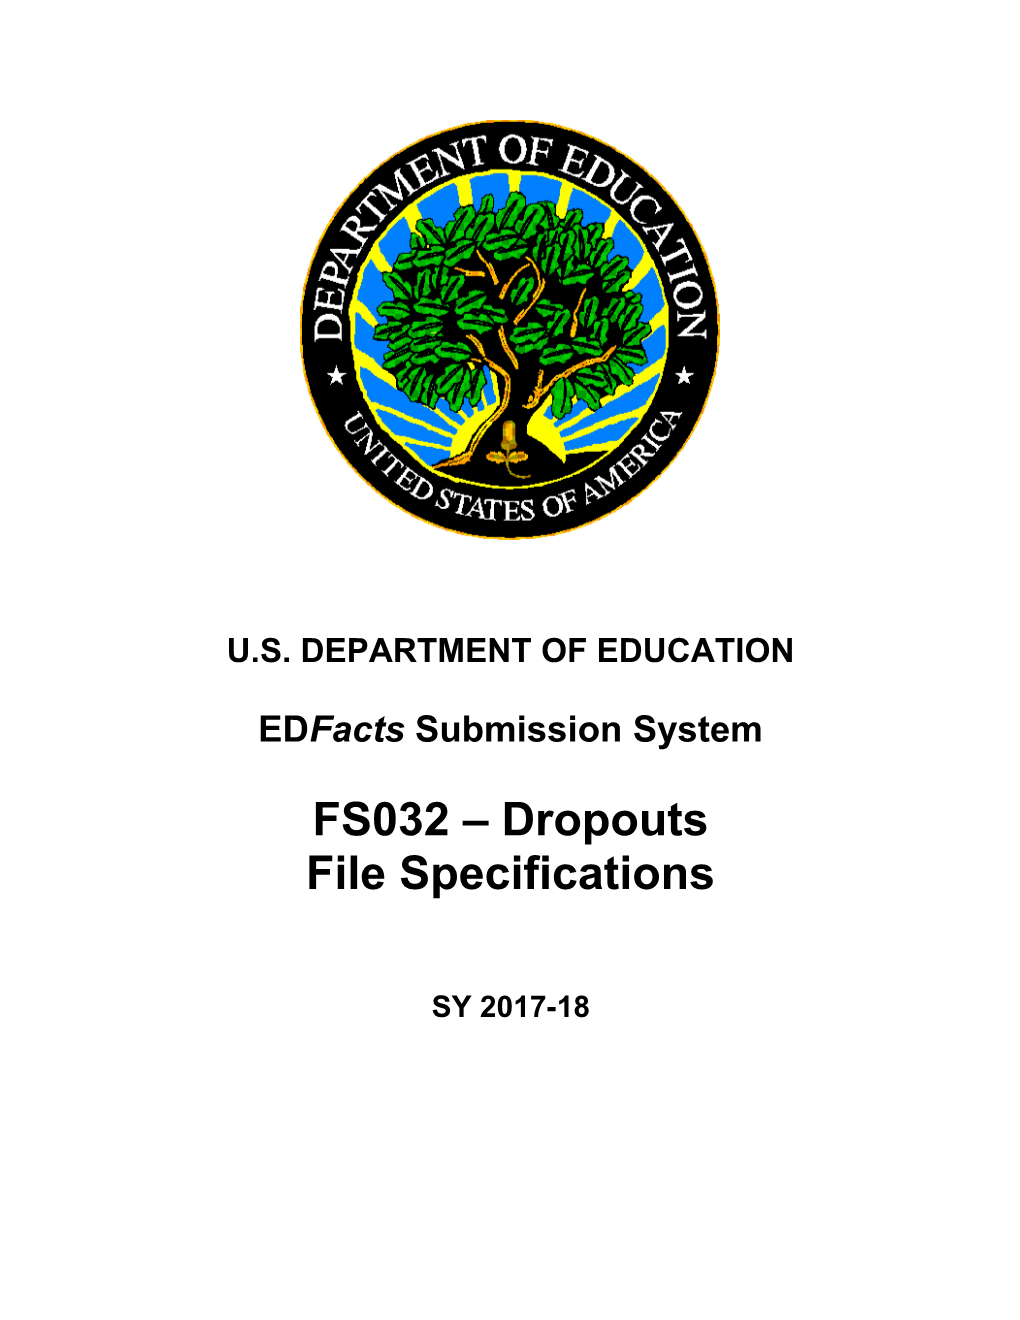 FS032 Dropouts File Specifications (Msword)